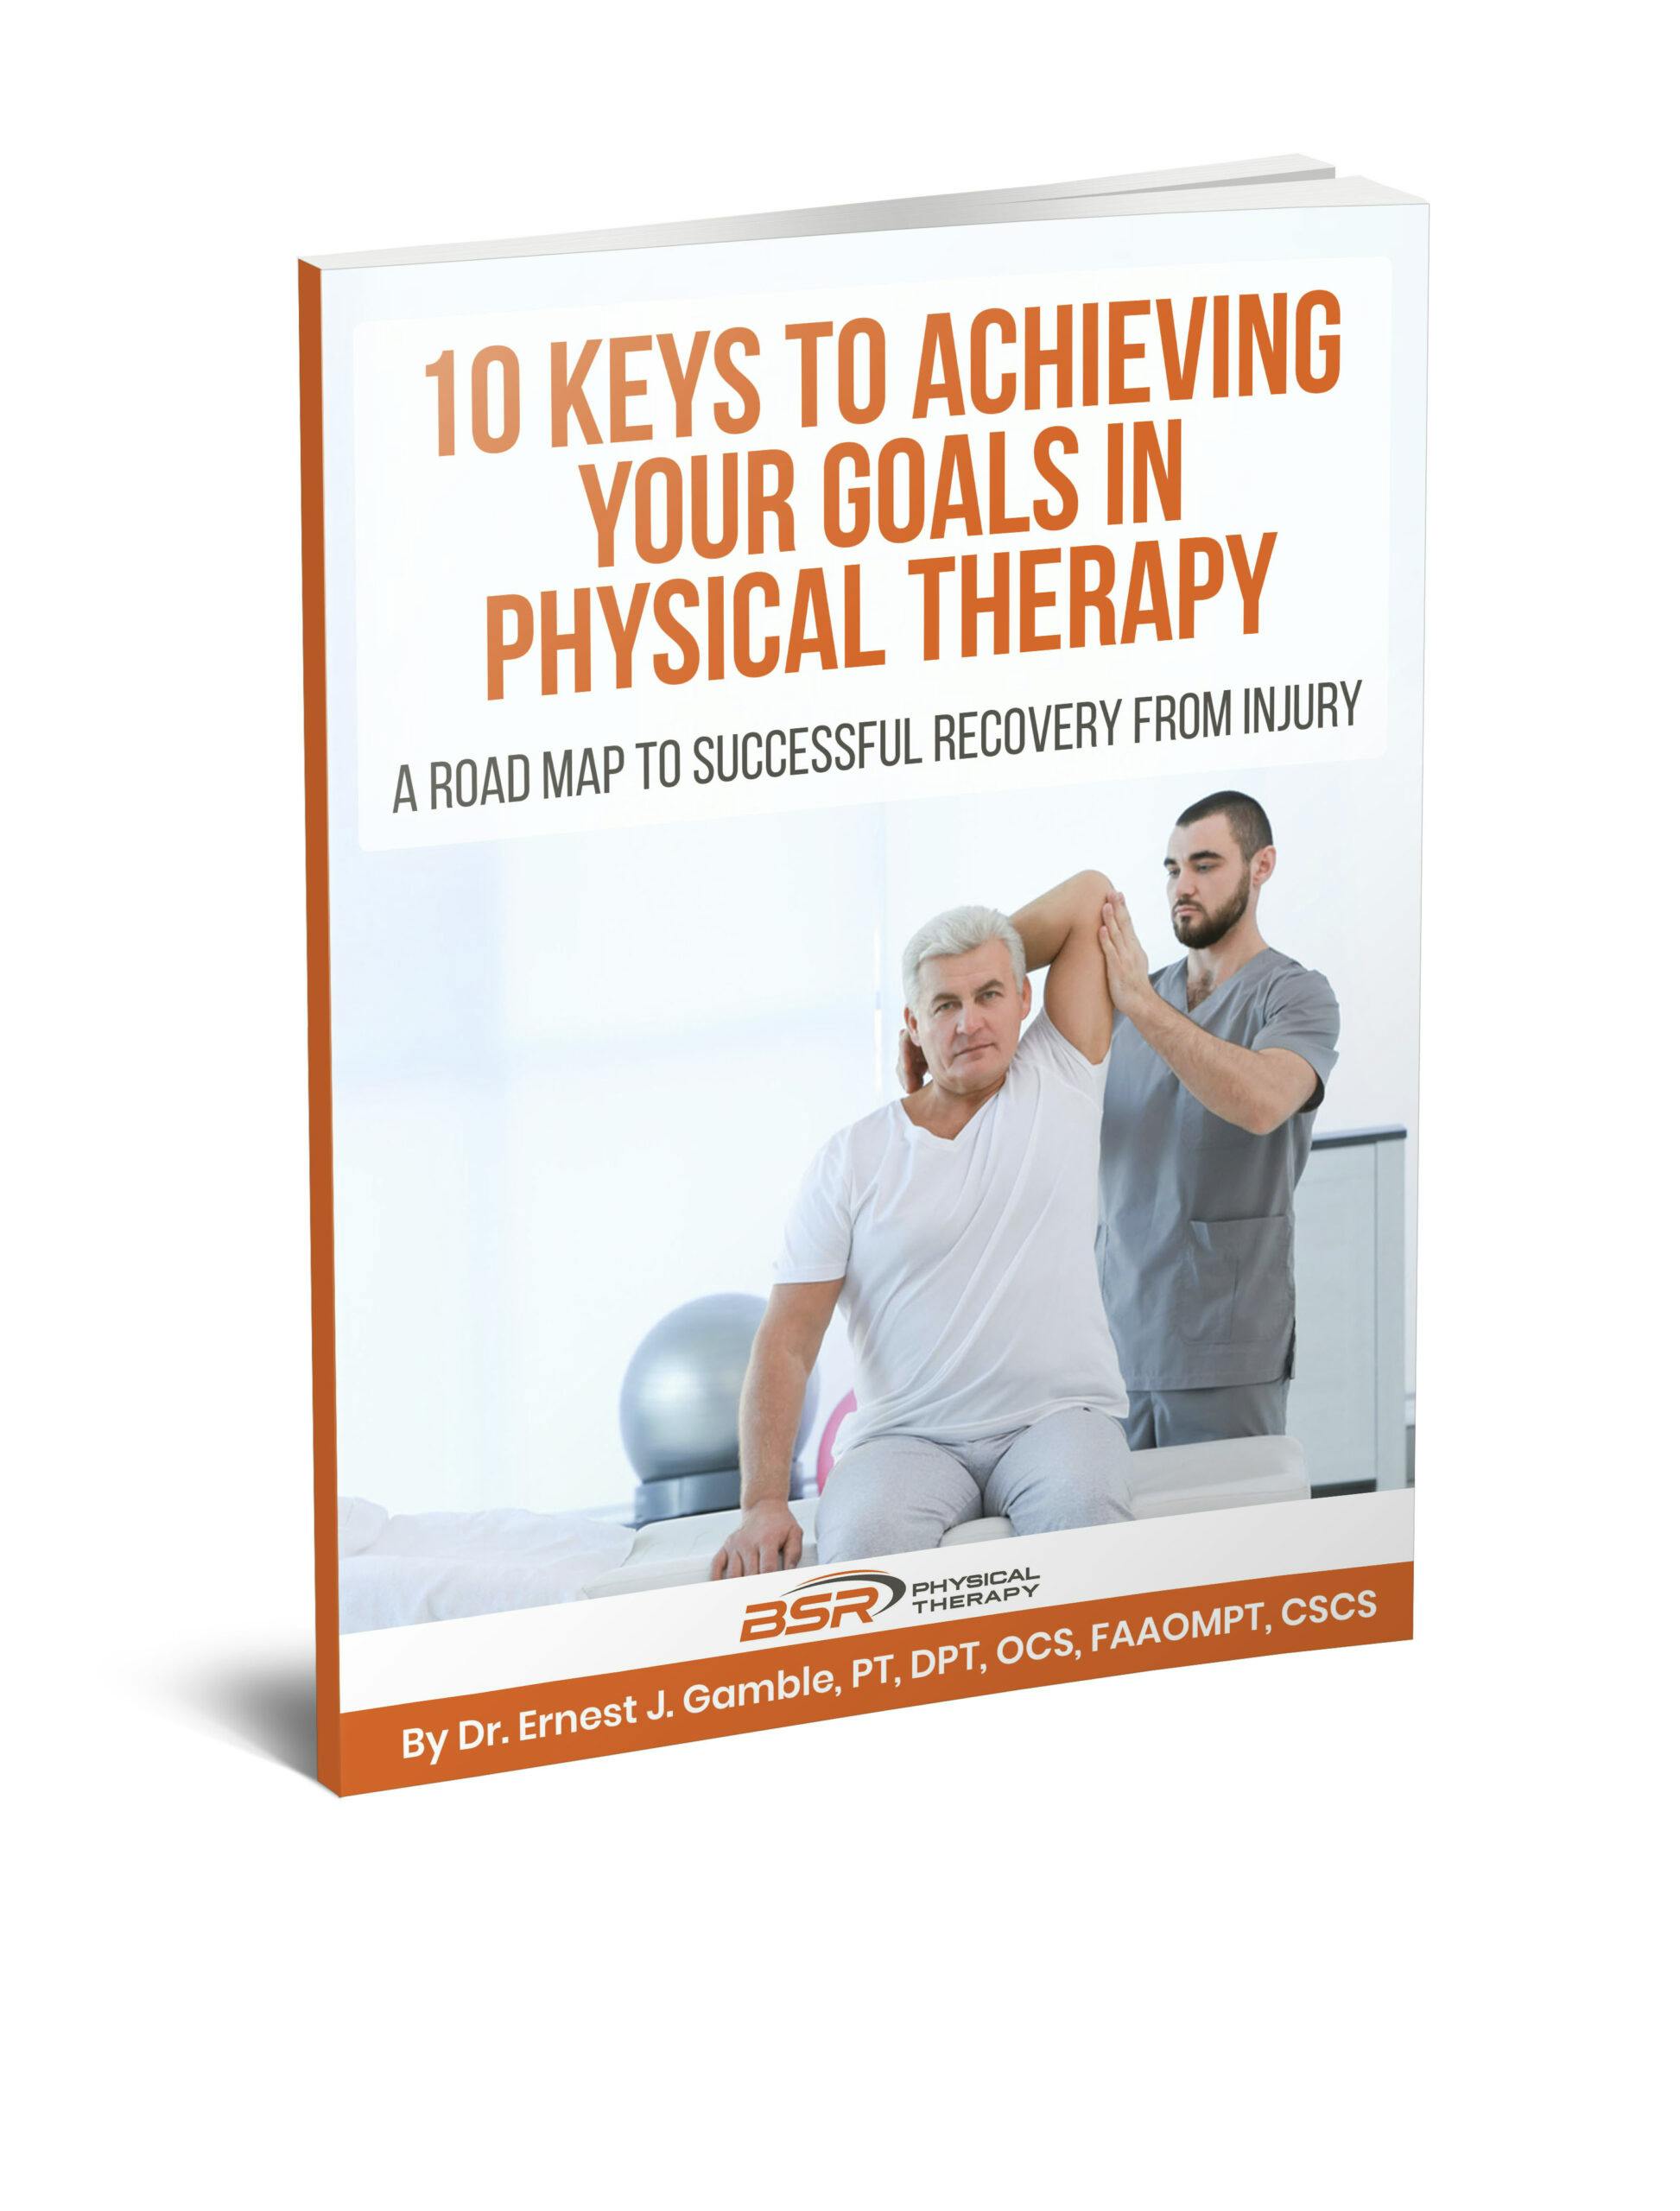 Tips for improving your chances of success in physical therapy